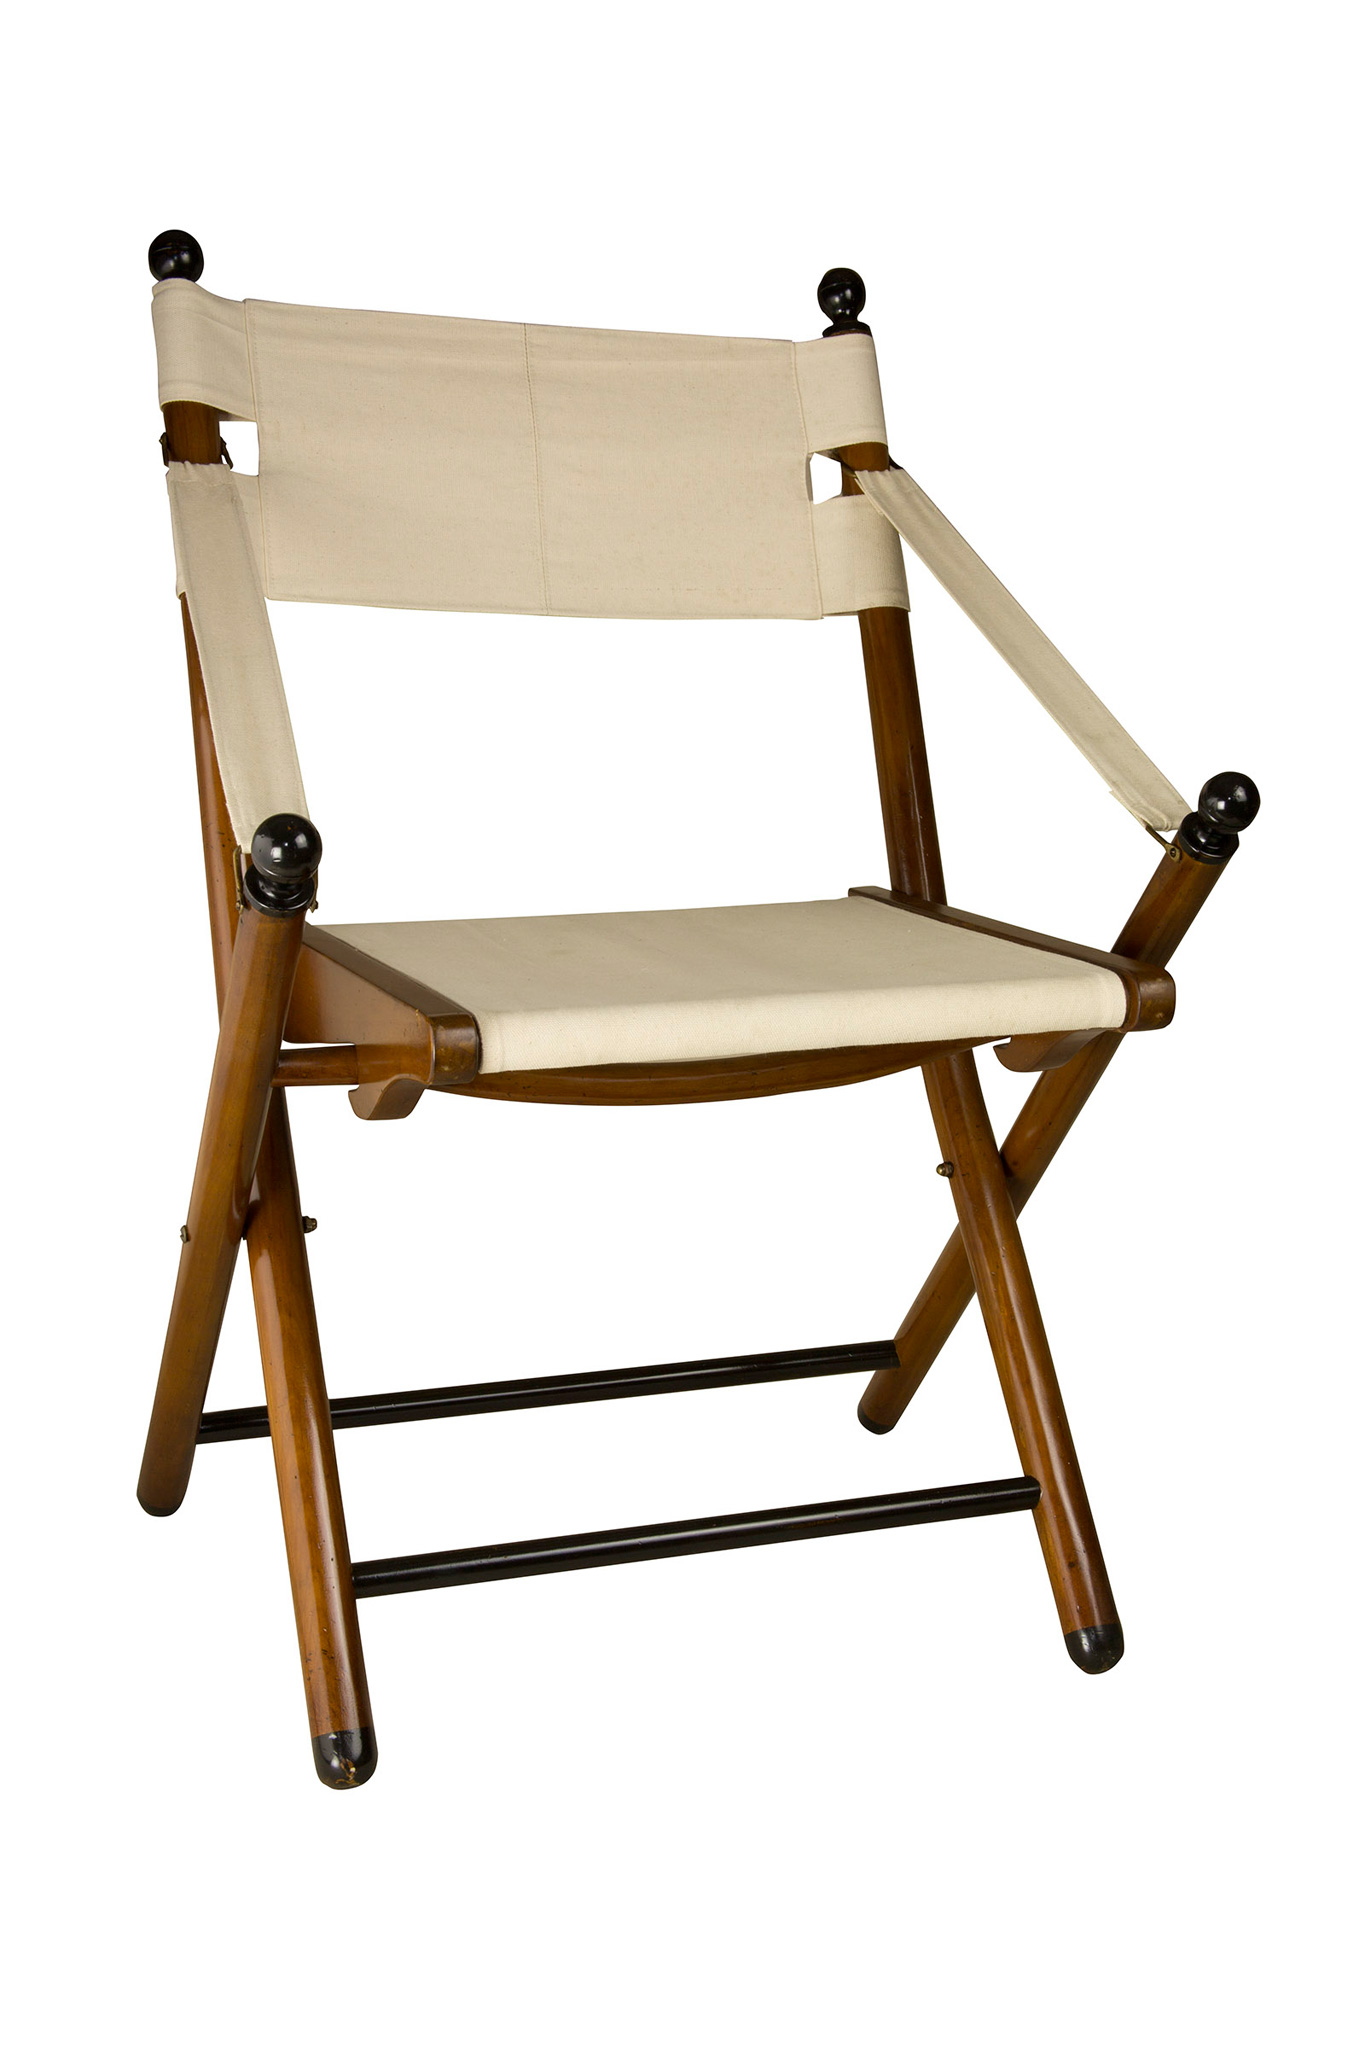 Campaign Folding Chair